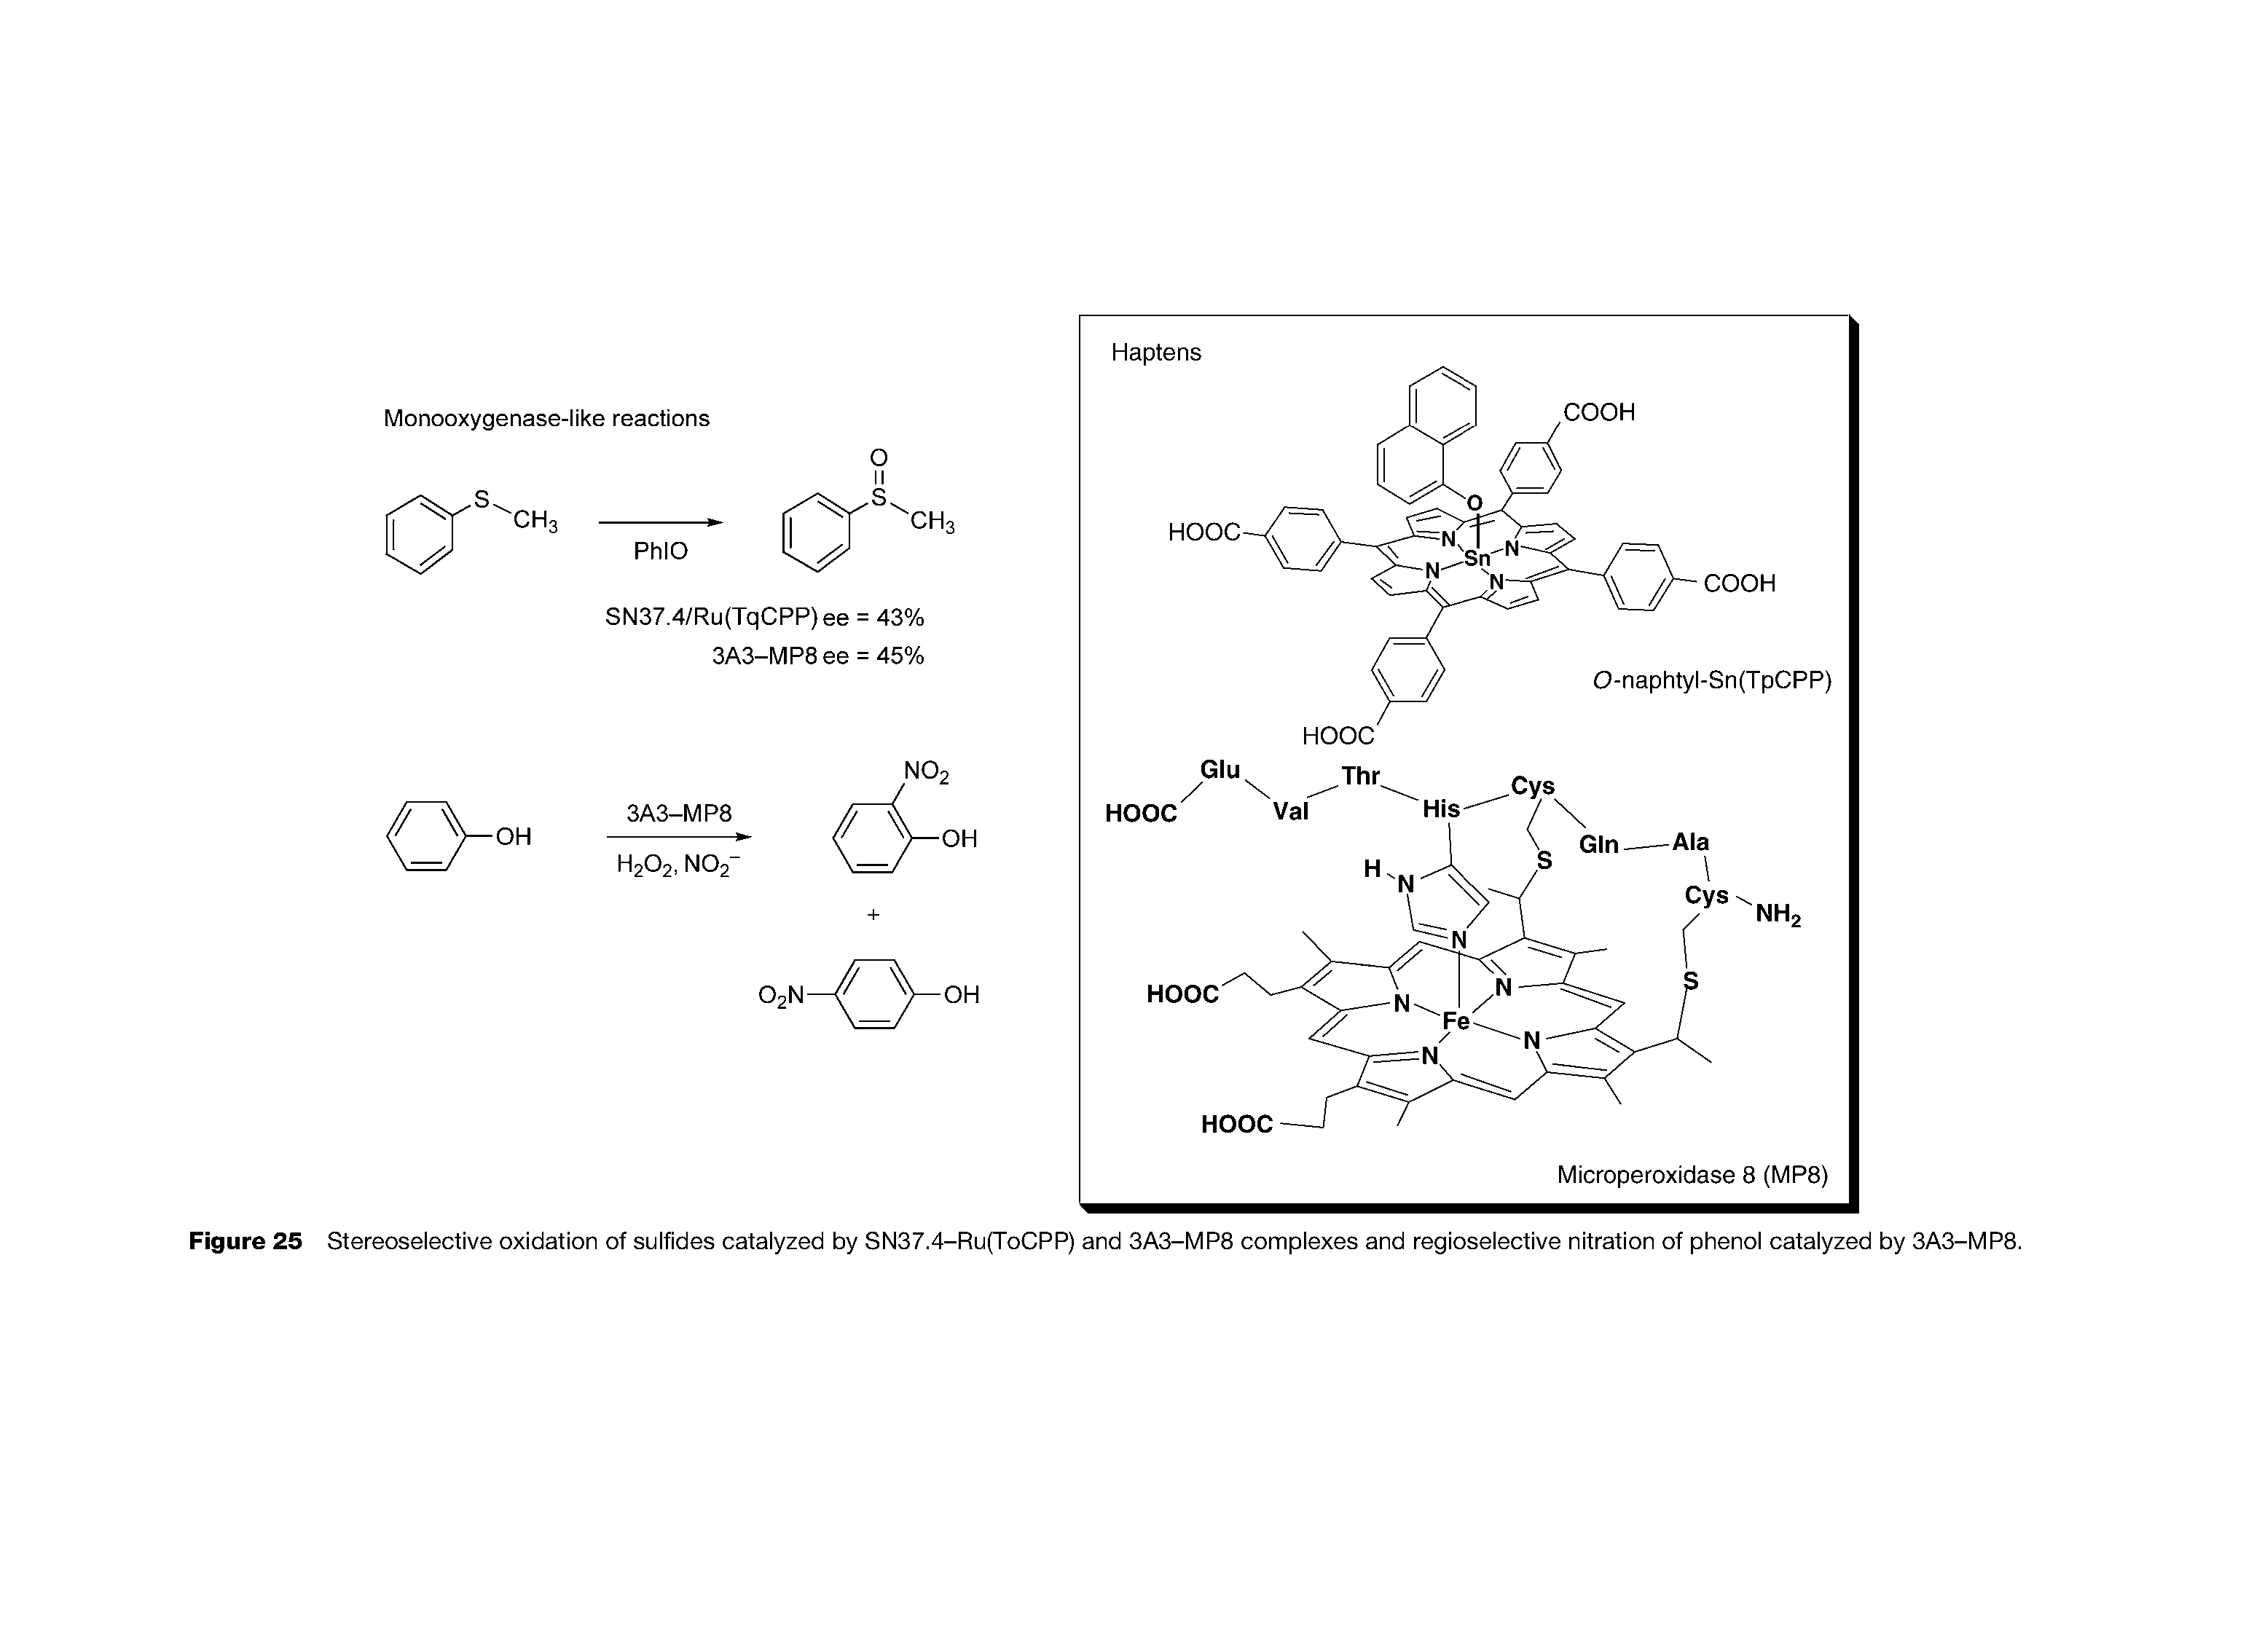 Figure 25 Stereoselective oxidation of sulfides catalyzed by SN37.4-Ru(ToCPP) and 3A3-MP8 complexes and regioselective nitration of phenol catalyzed by 3A3-MP8.